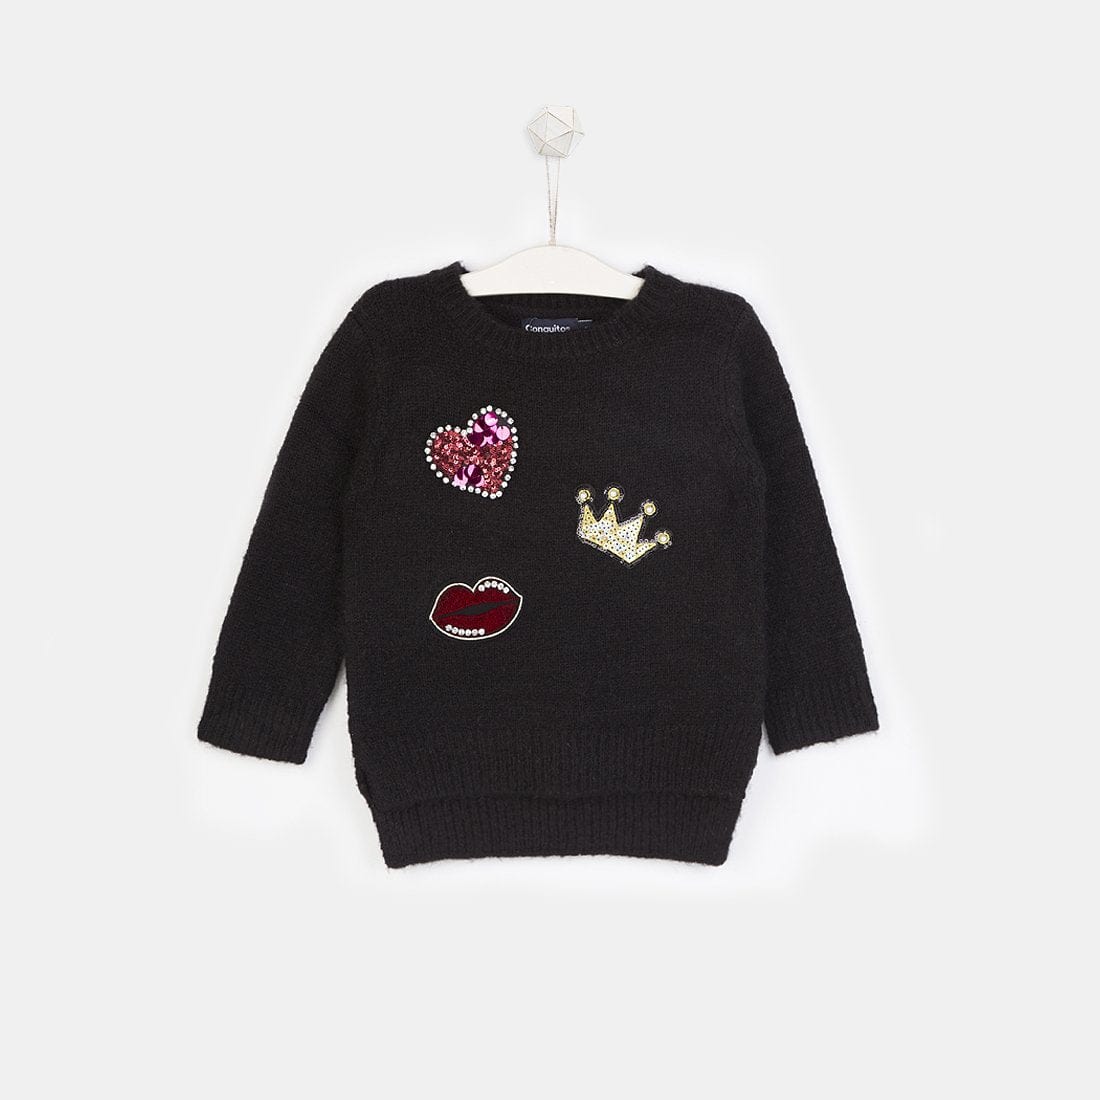 CONGUITOS TEXTIL Clothing Girls Patches Black Sweater